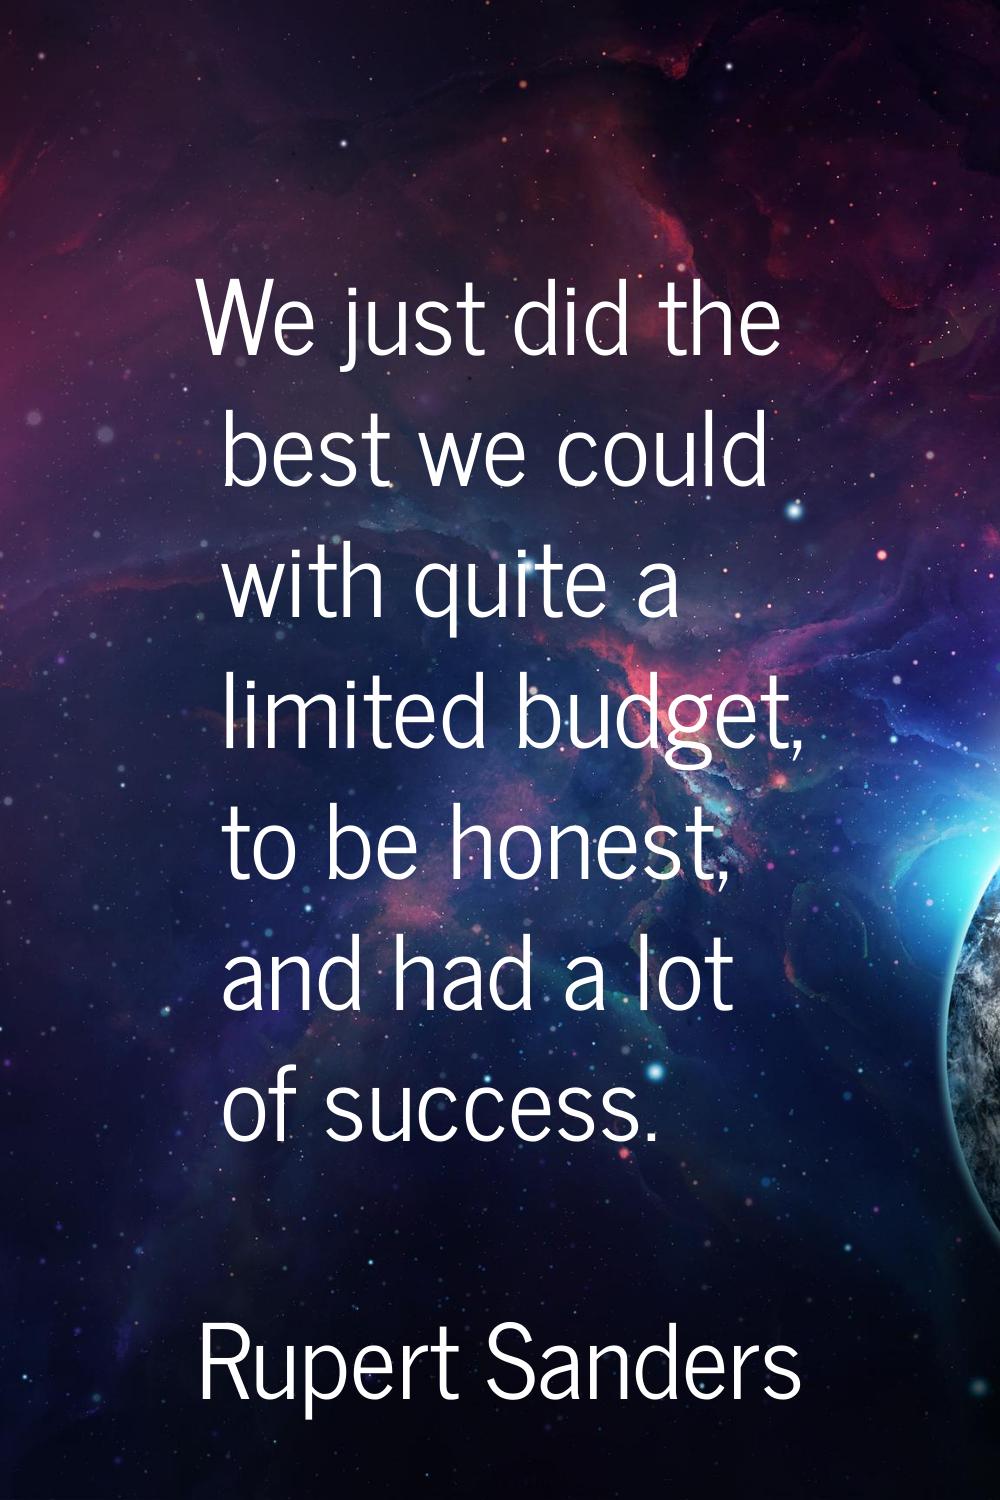 We just did the best we could with quite a limited budget, to be honest, and had a lot of success.